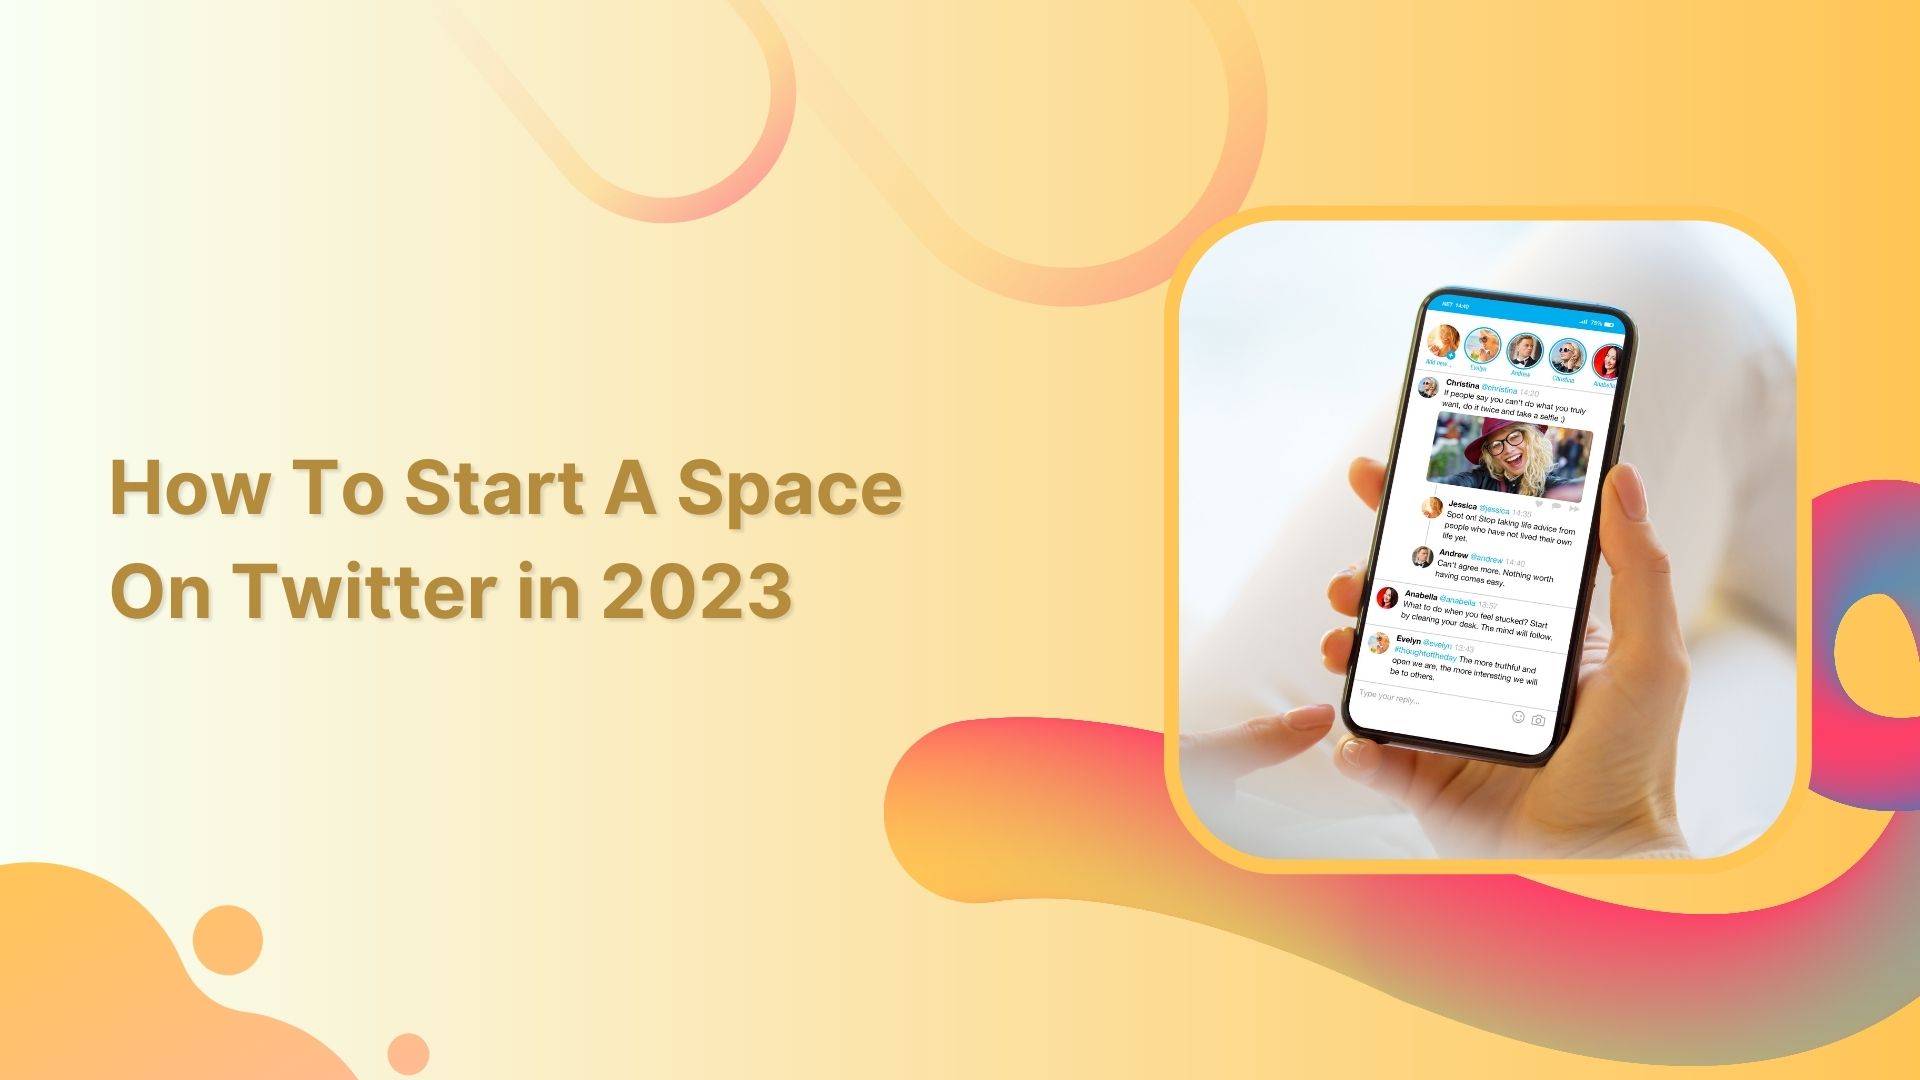 How To Start A Space On Twitter in 2023